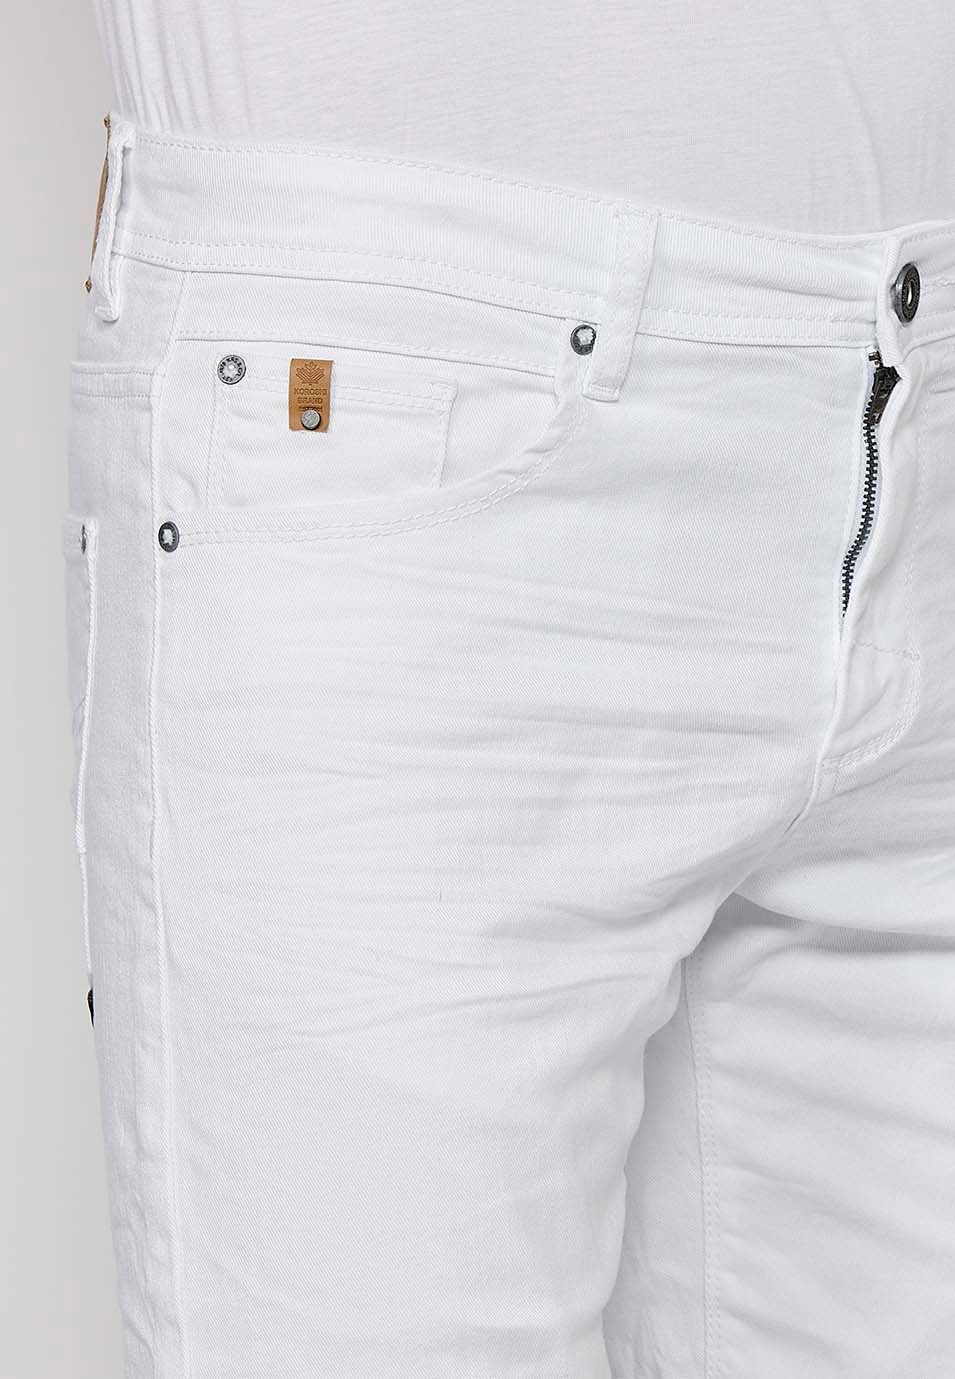 Denim Bermuda shorts with cuffed finish and front zipper and button closure. Five pockets, one match pocket, White for Men 8